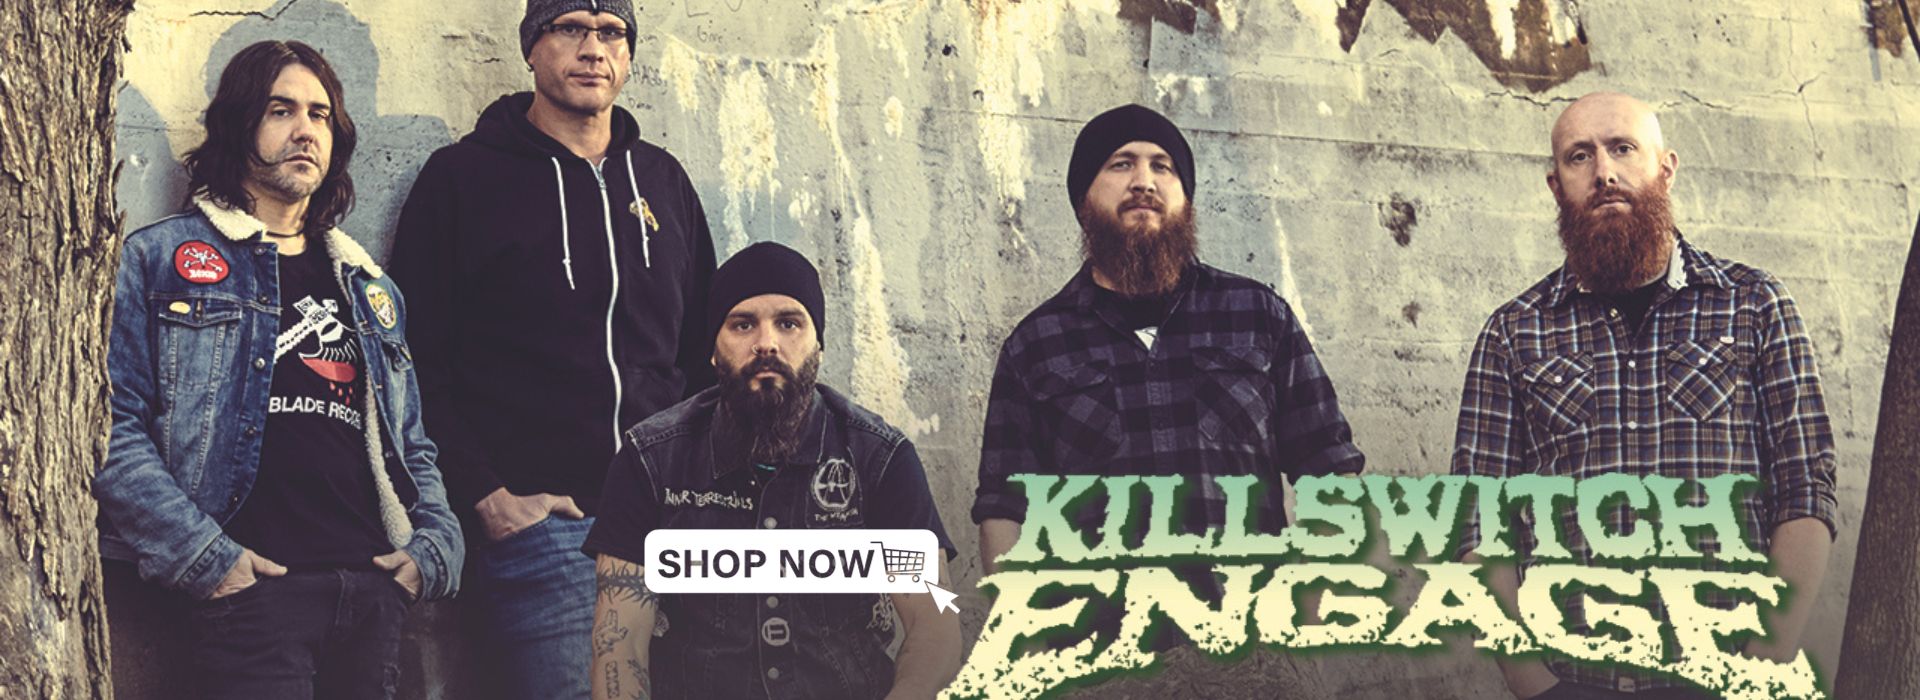 Killswitch Engage Store Banner